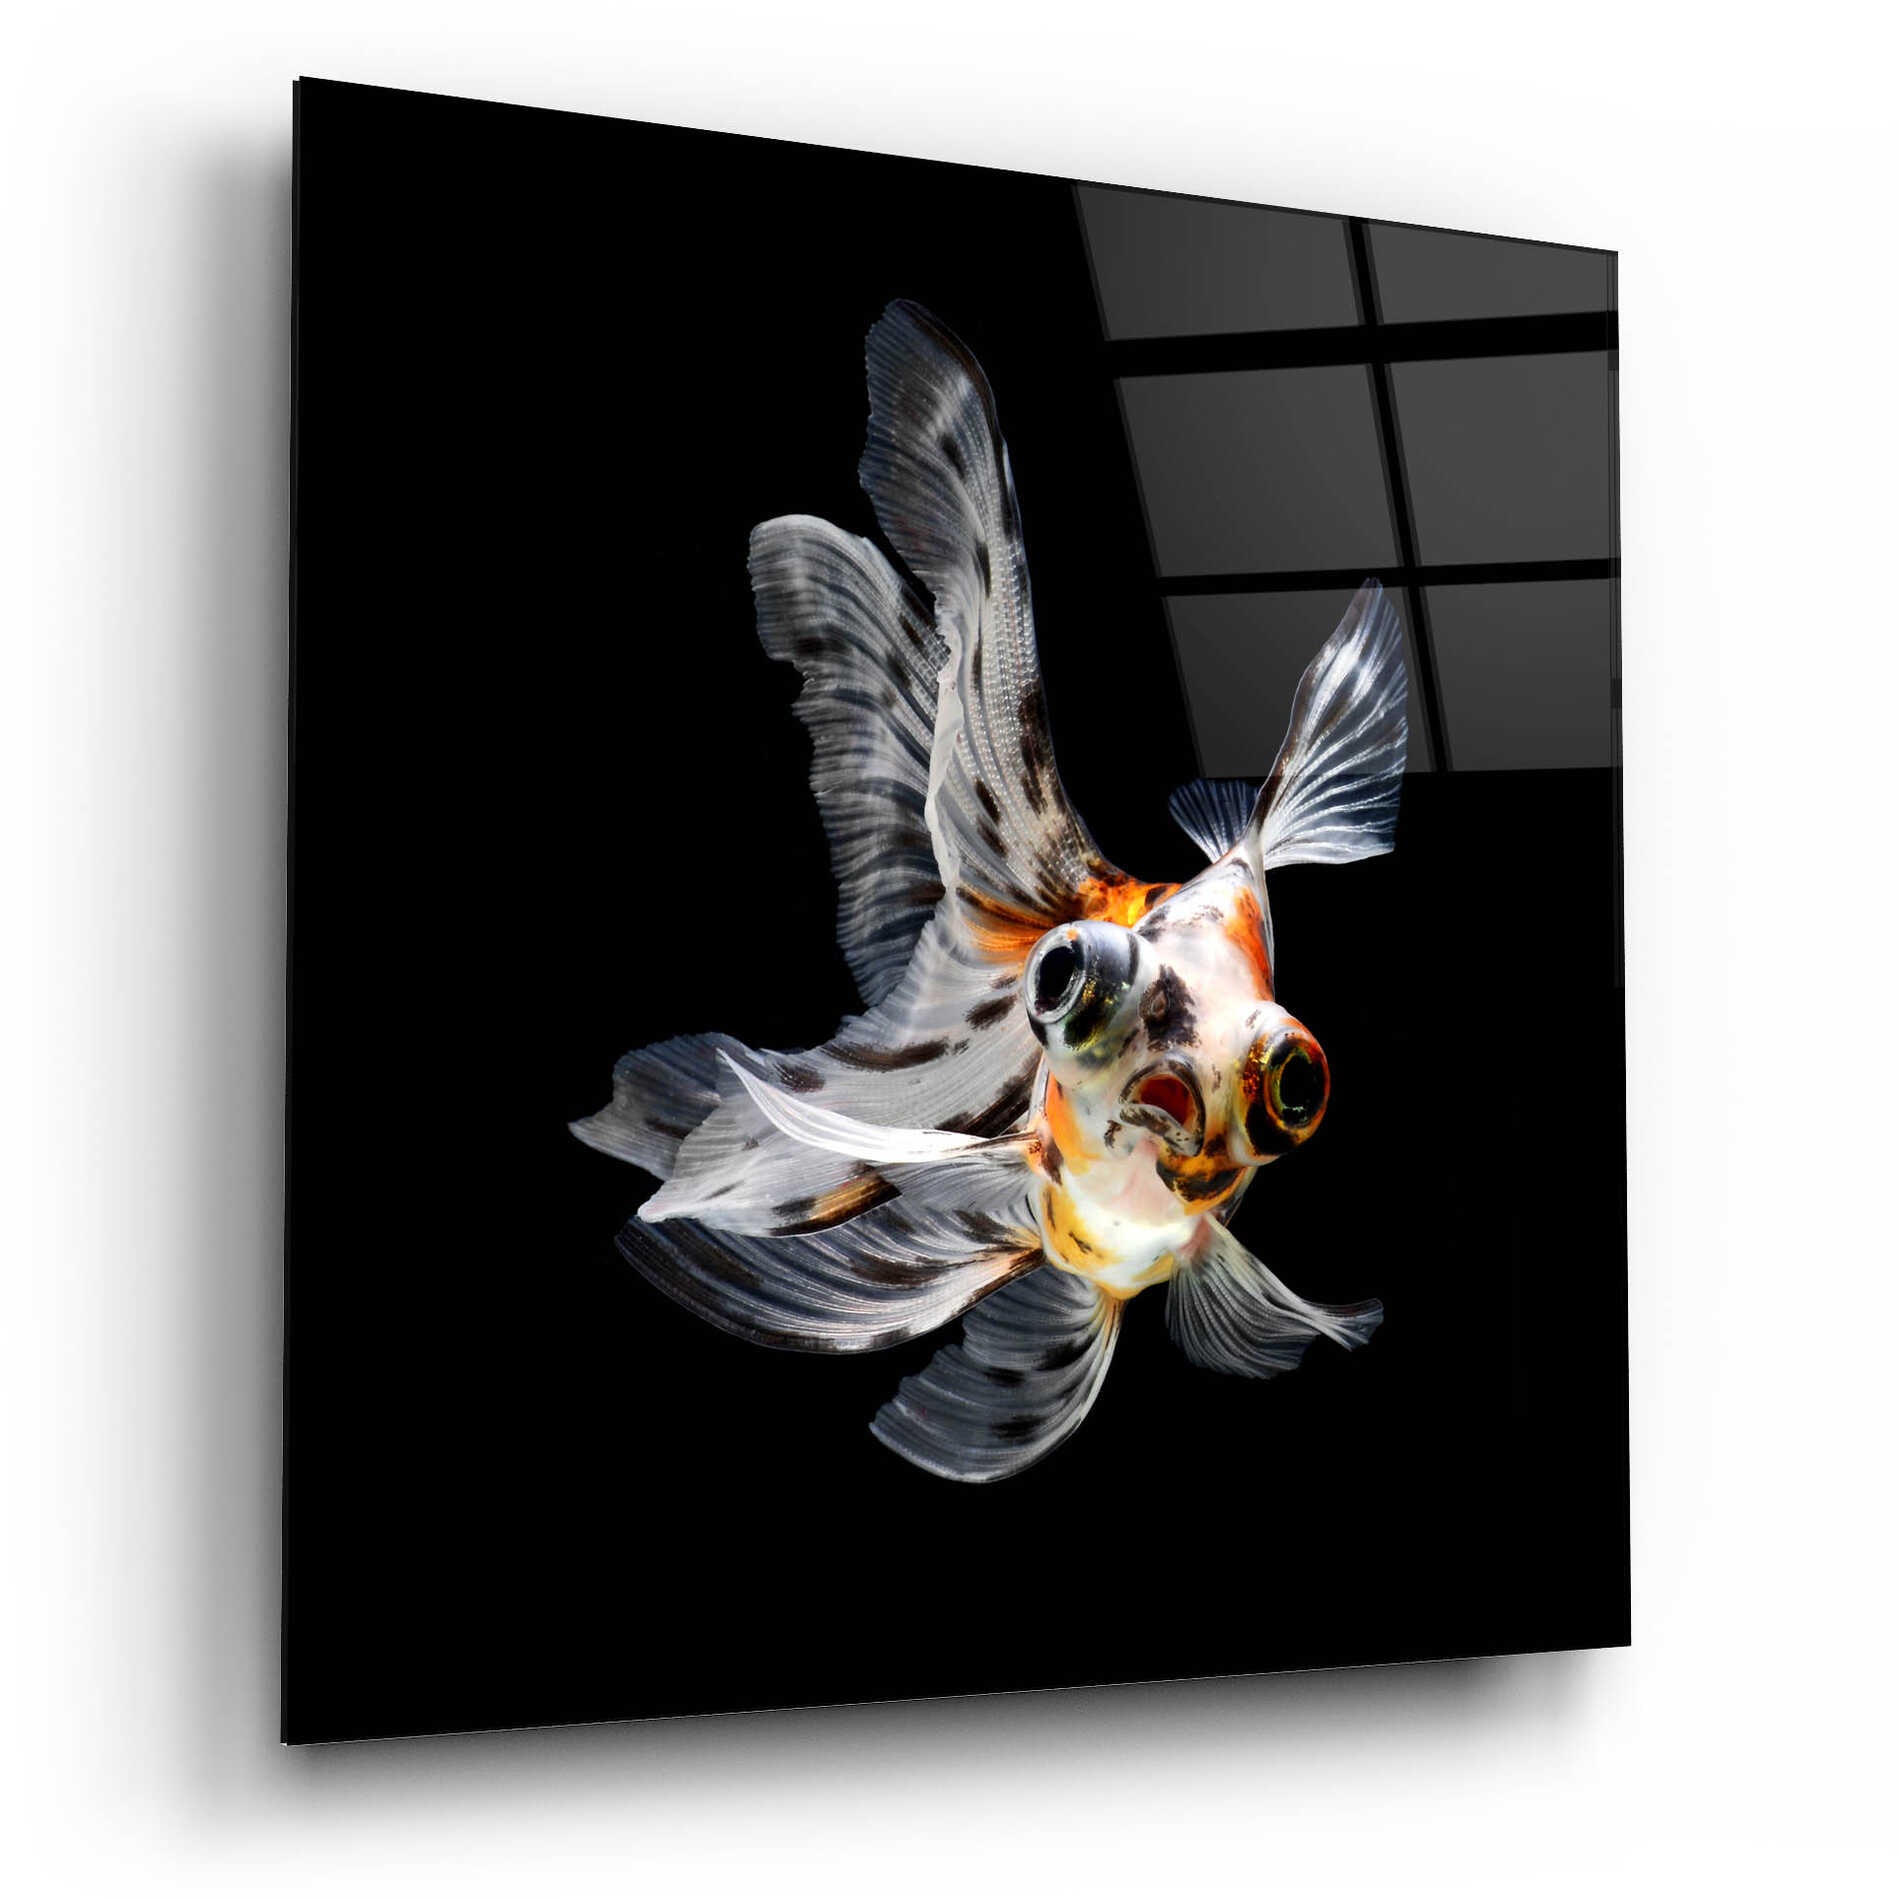 Epic Art 'You Did What' by Epic Portfolio Acrylic Glass Wall Art,12x12